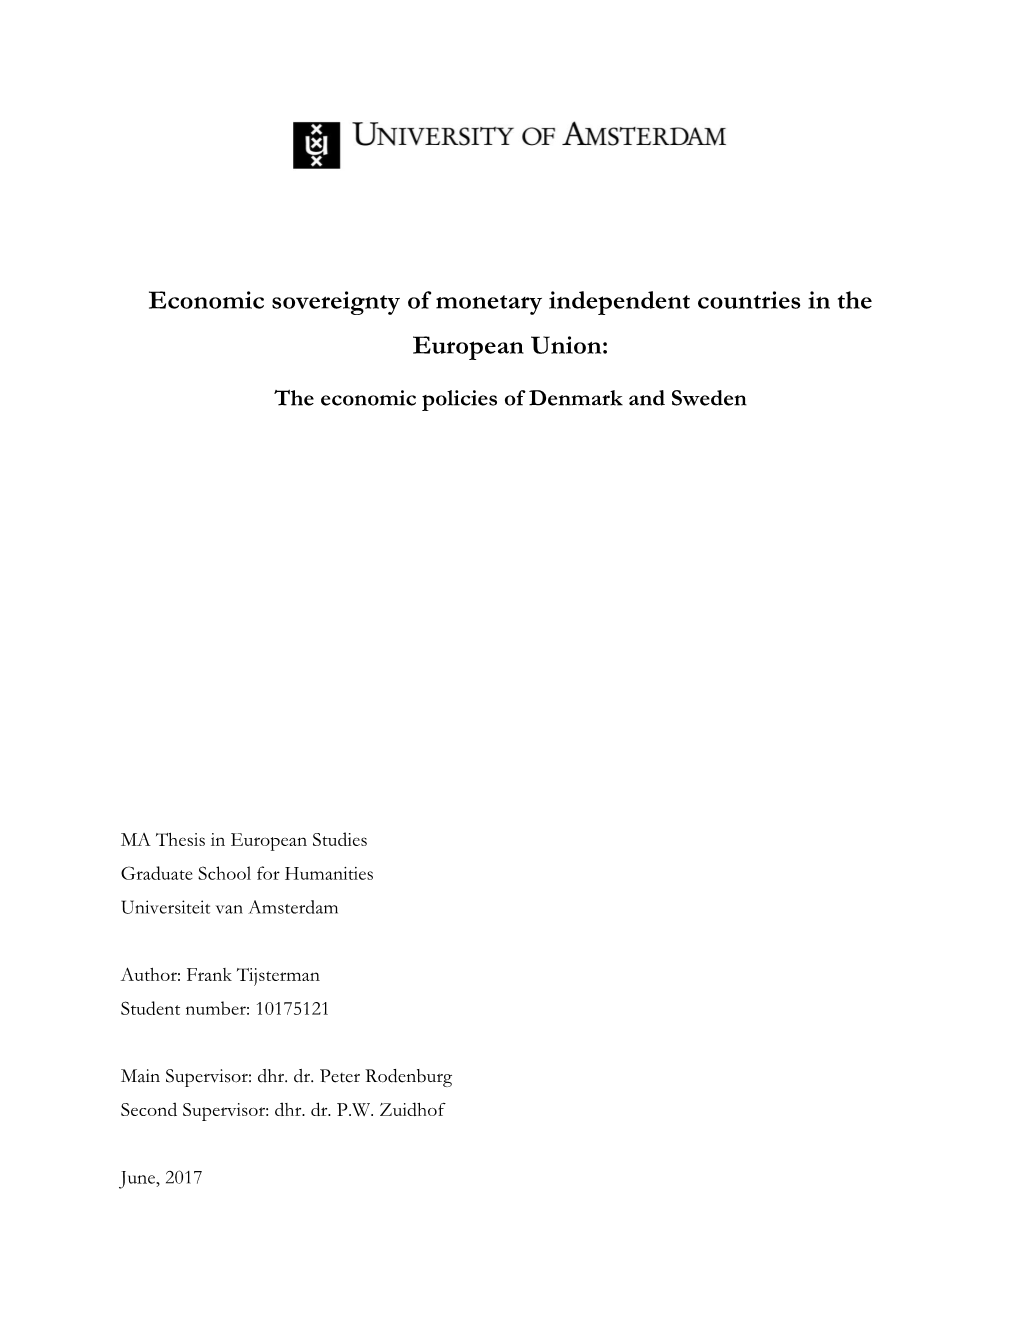 Economic Sovereignty of Monetary Independent Countries in the European Union